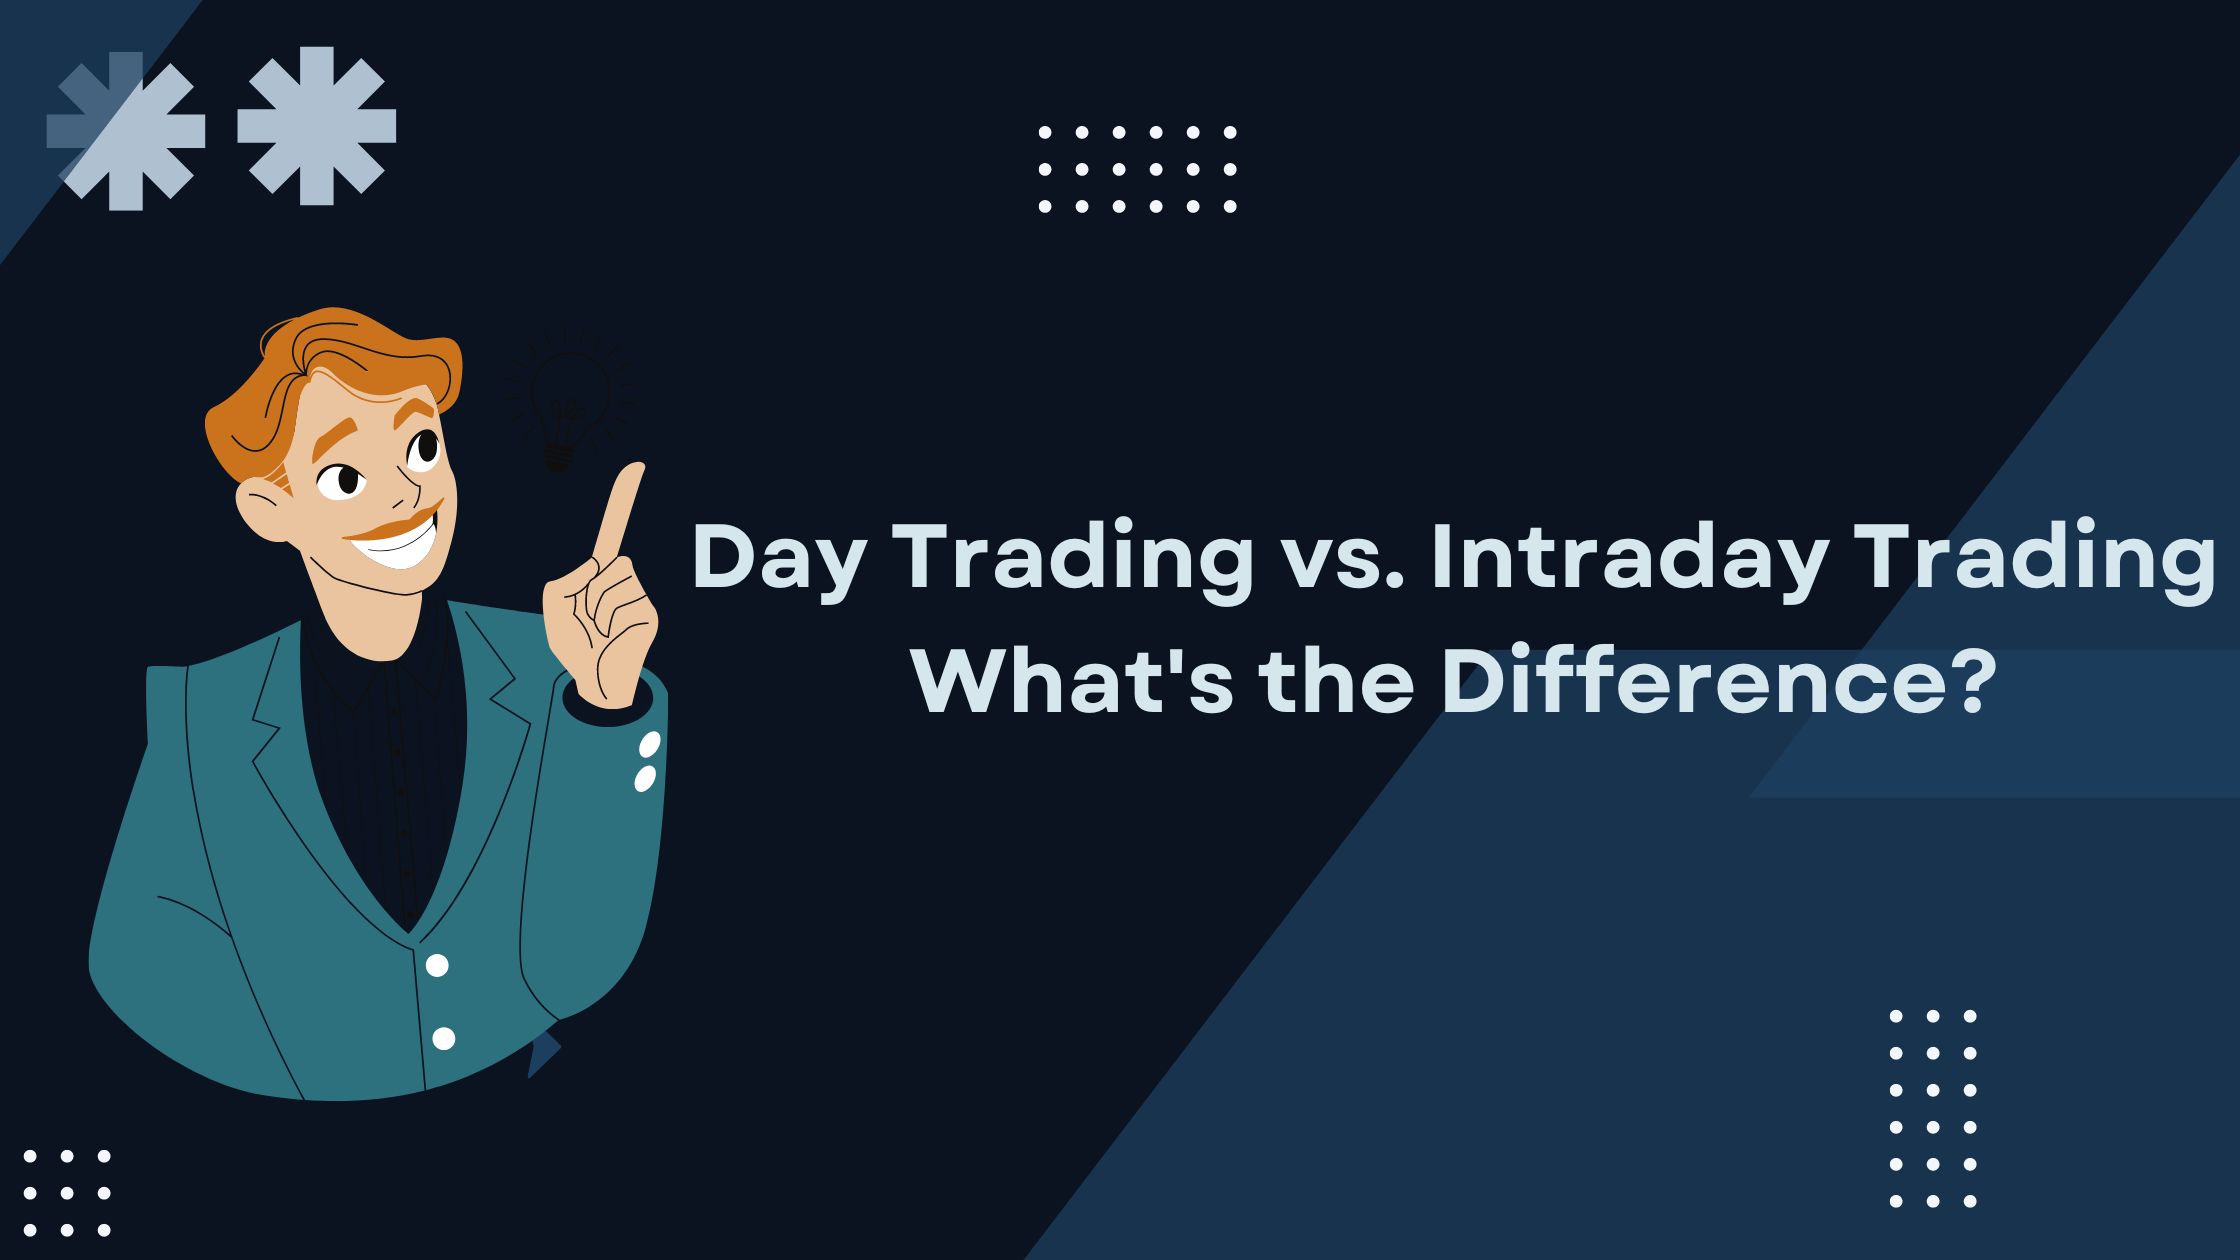 Day Trading vs. Intraday Trading: What’s the Difference?